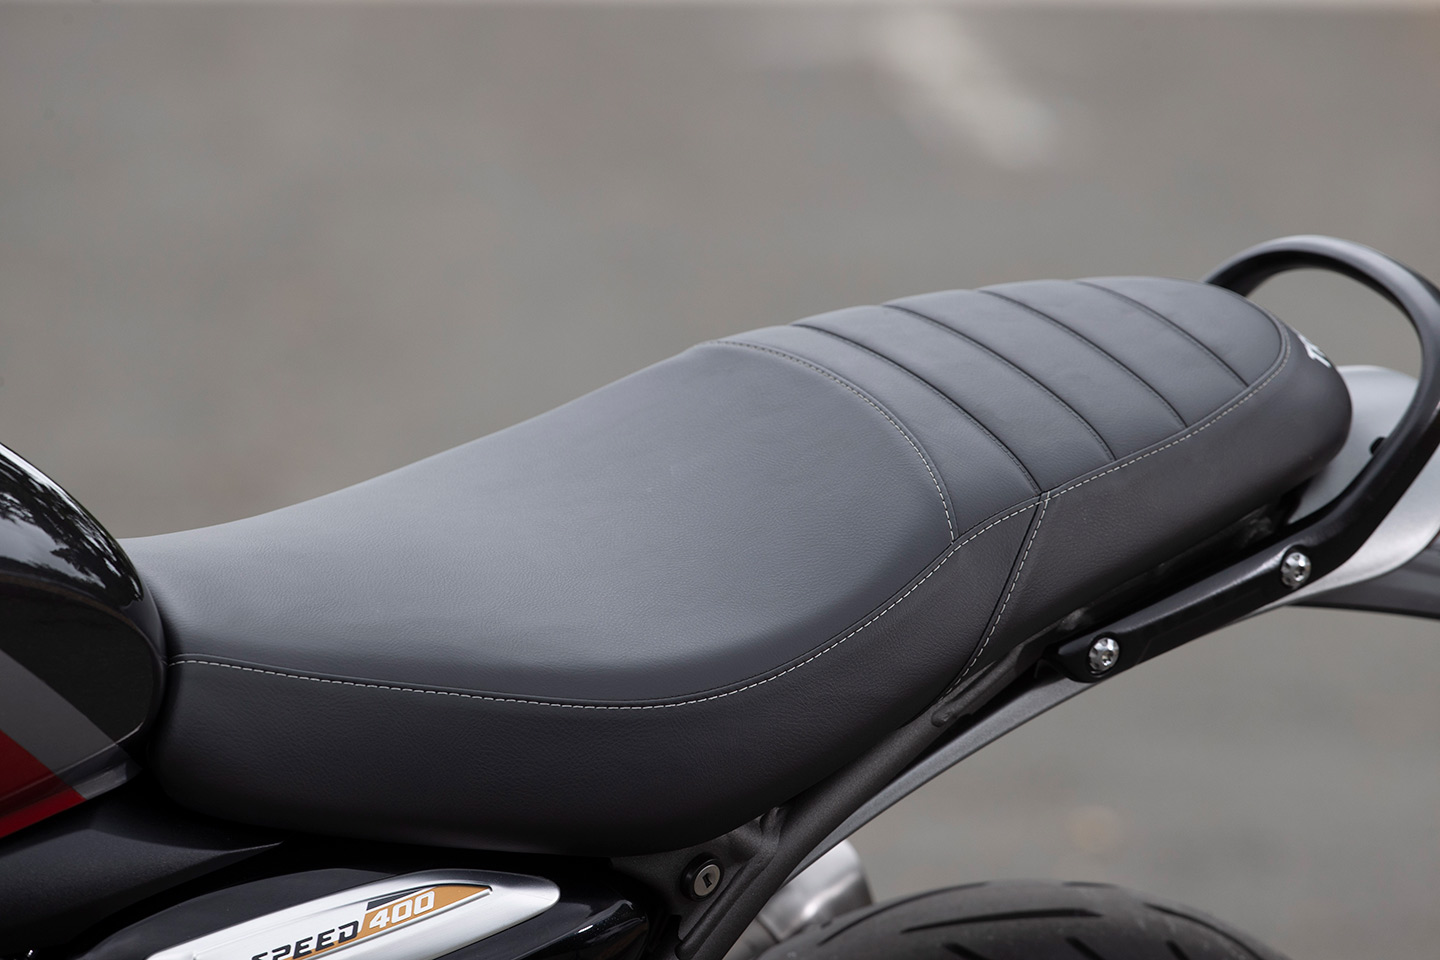 Set 31.1 inches above the pavement, the Speed 400’s flat seat is comfortable.